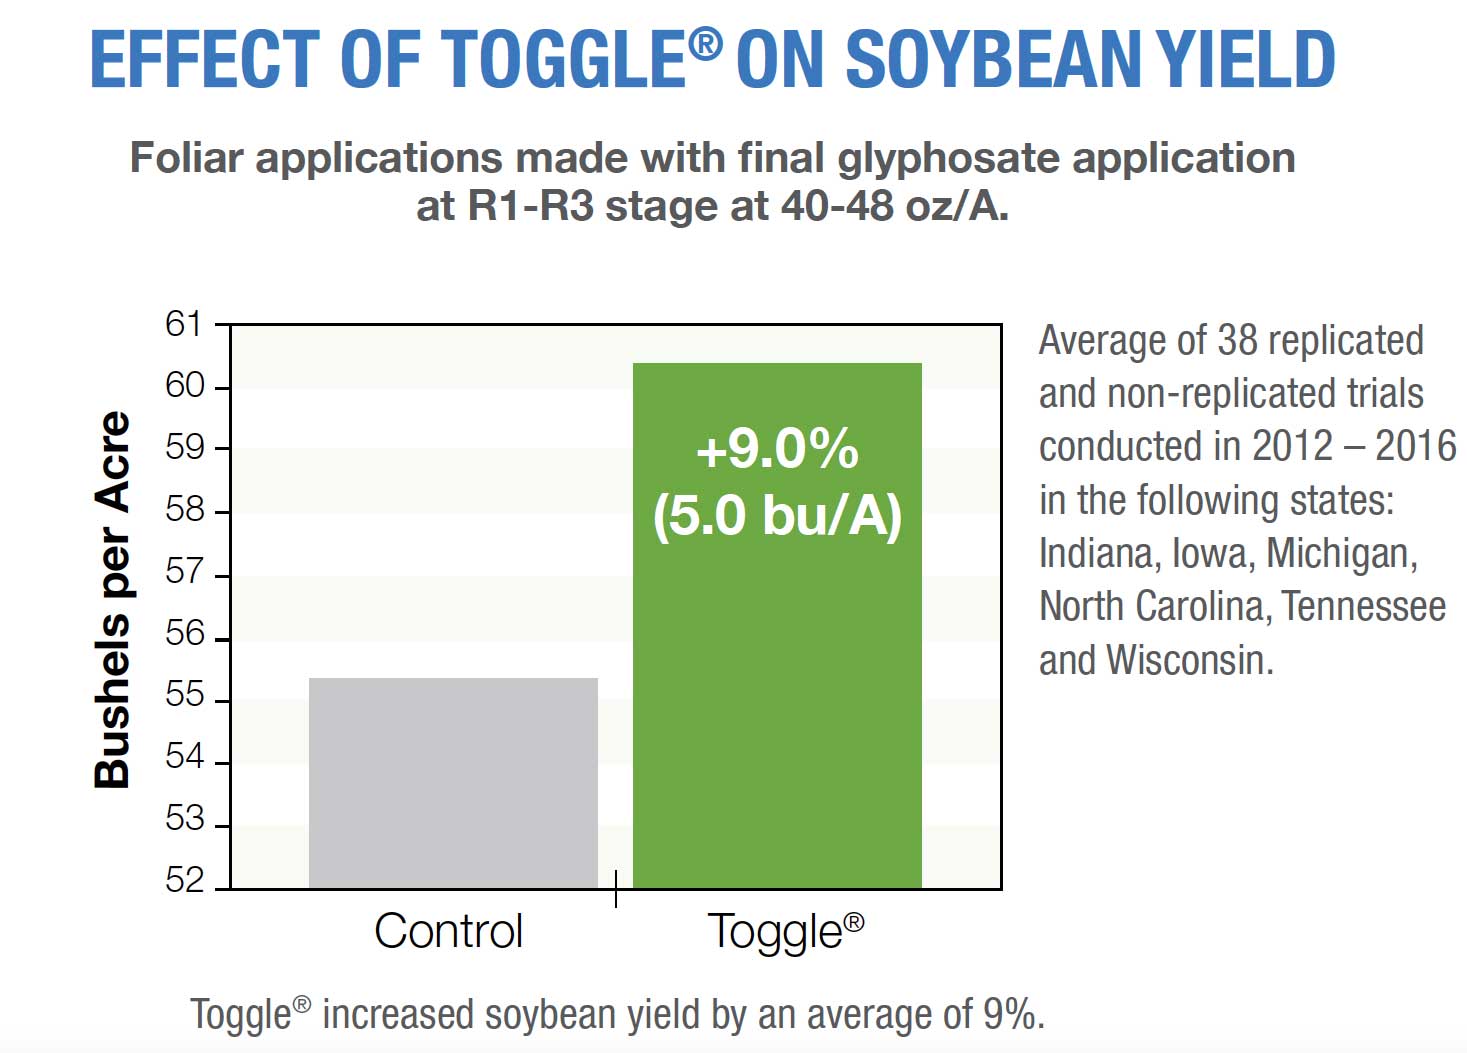 Effect of Toggle on Soybean Yield